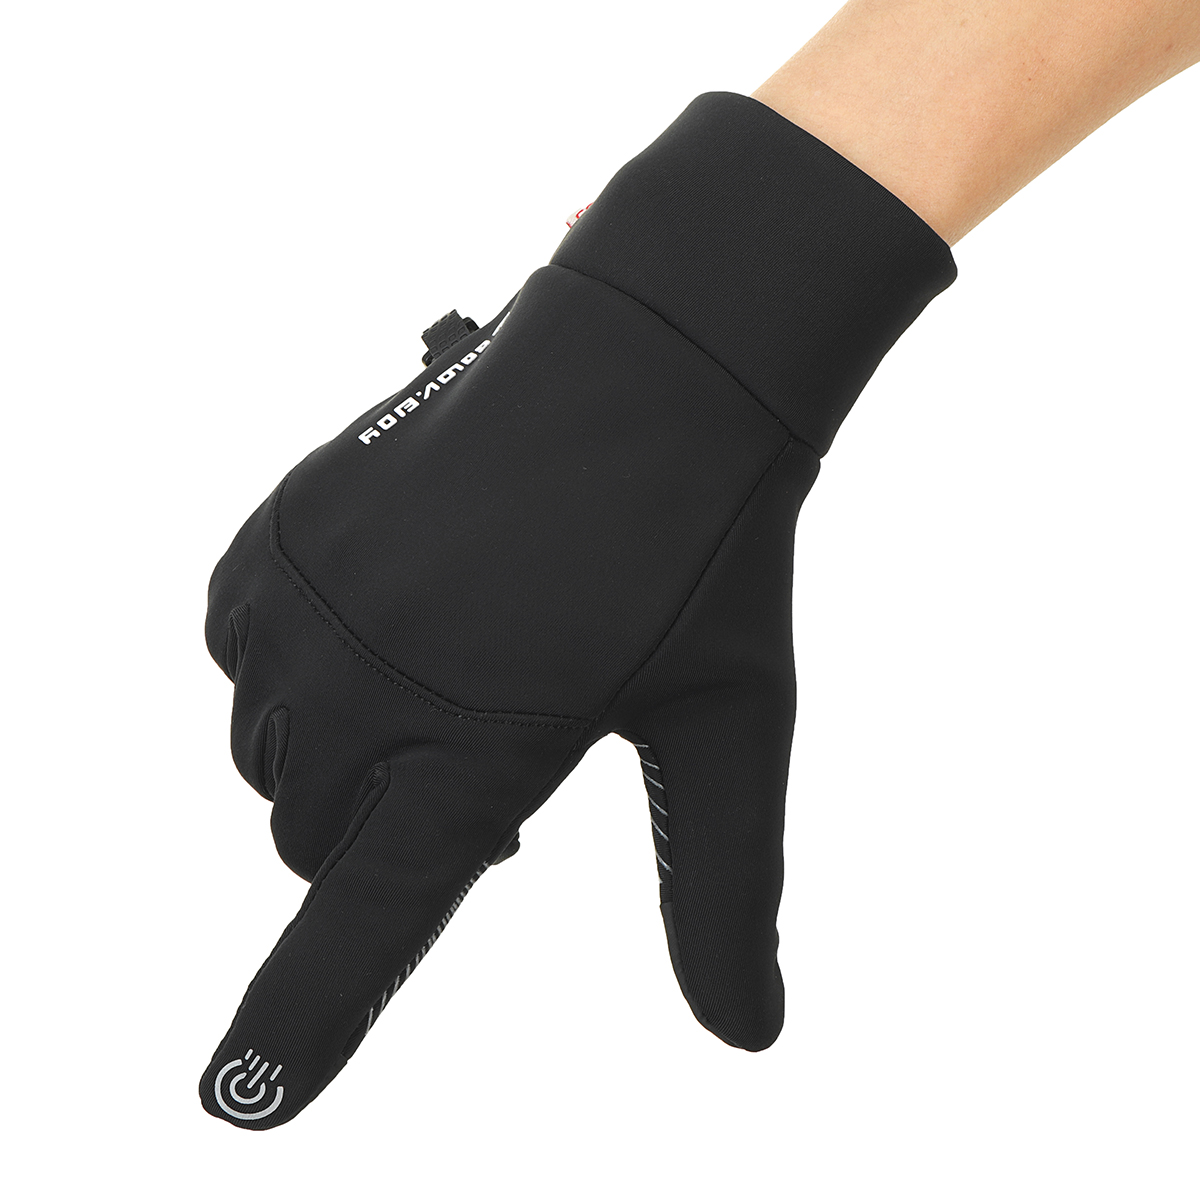 Winter-Warm-Touch-Screen-Thermal-Gloves-Ski-Snow-Snowboard-Cycling-Waterproof-Winter-Gloves-1921750-5